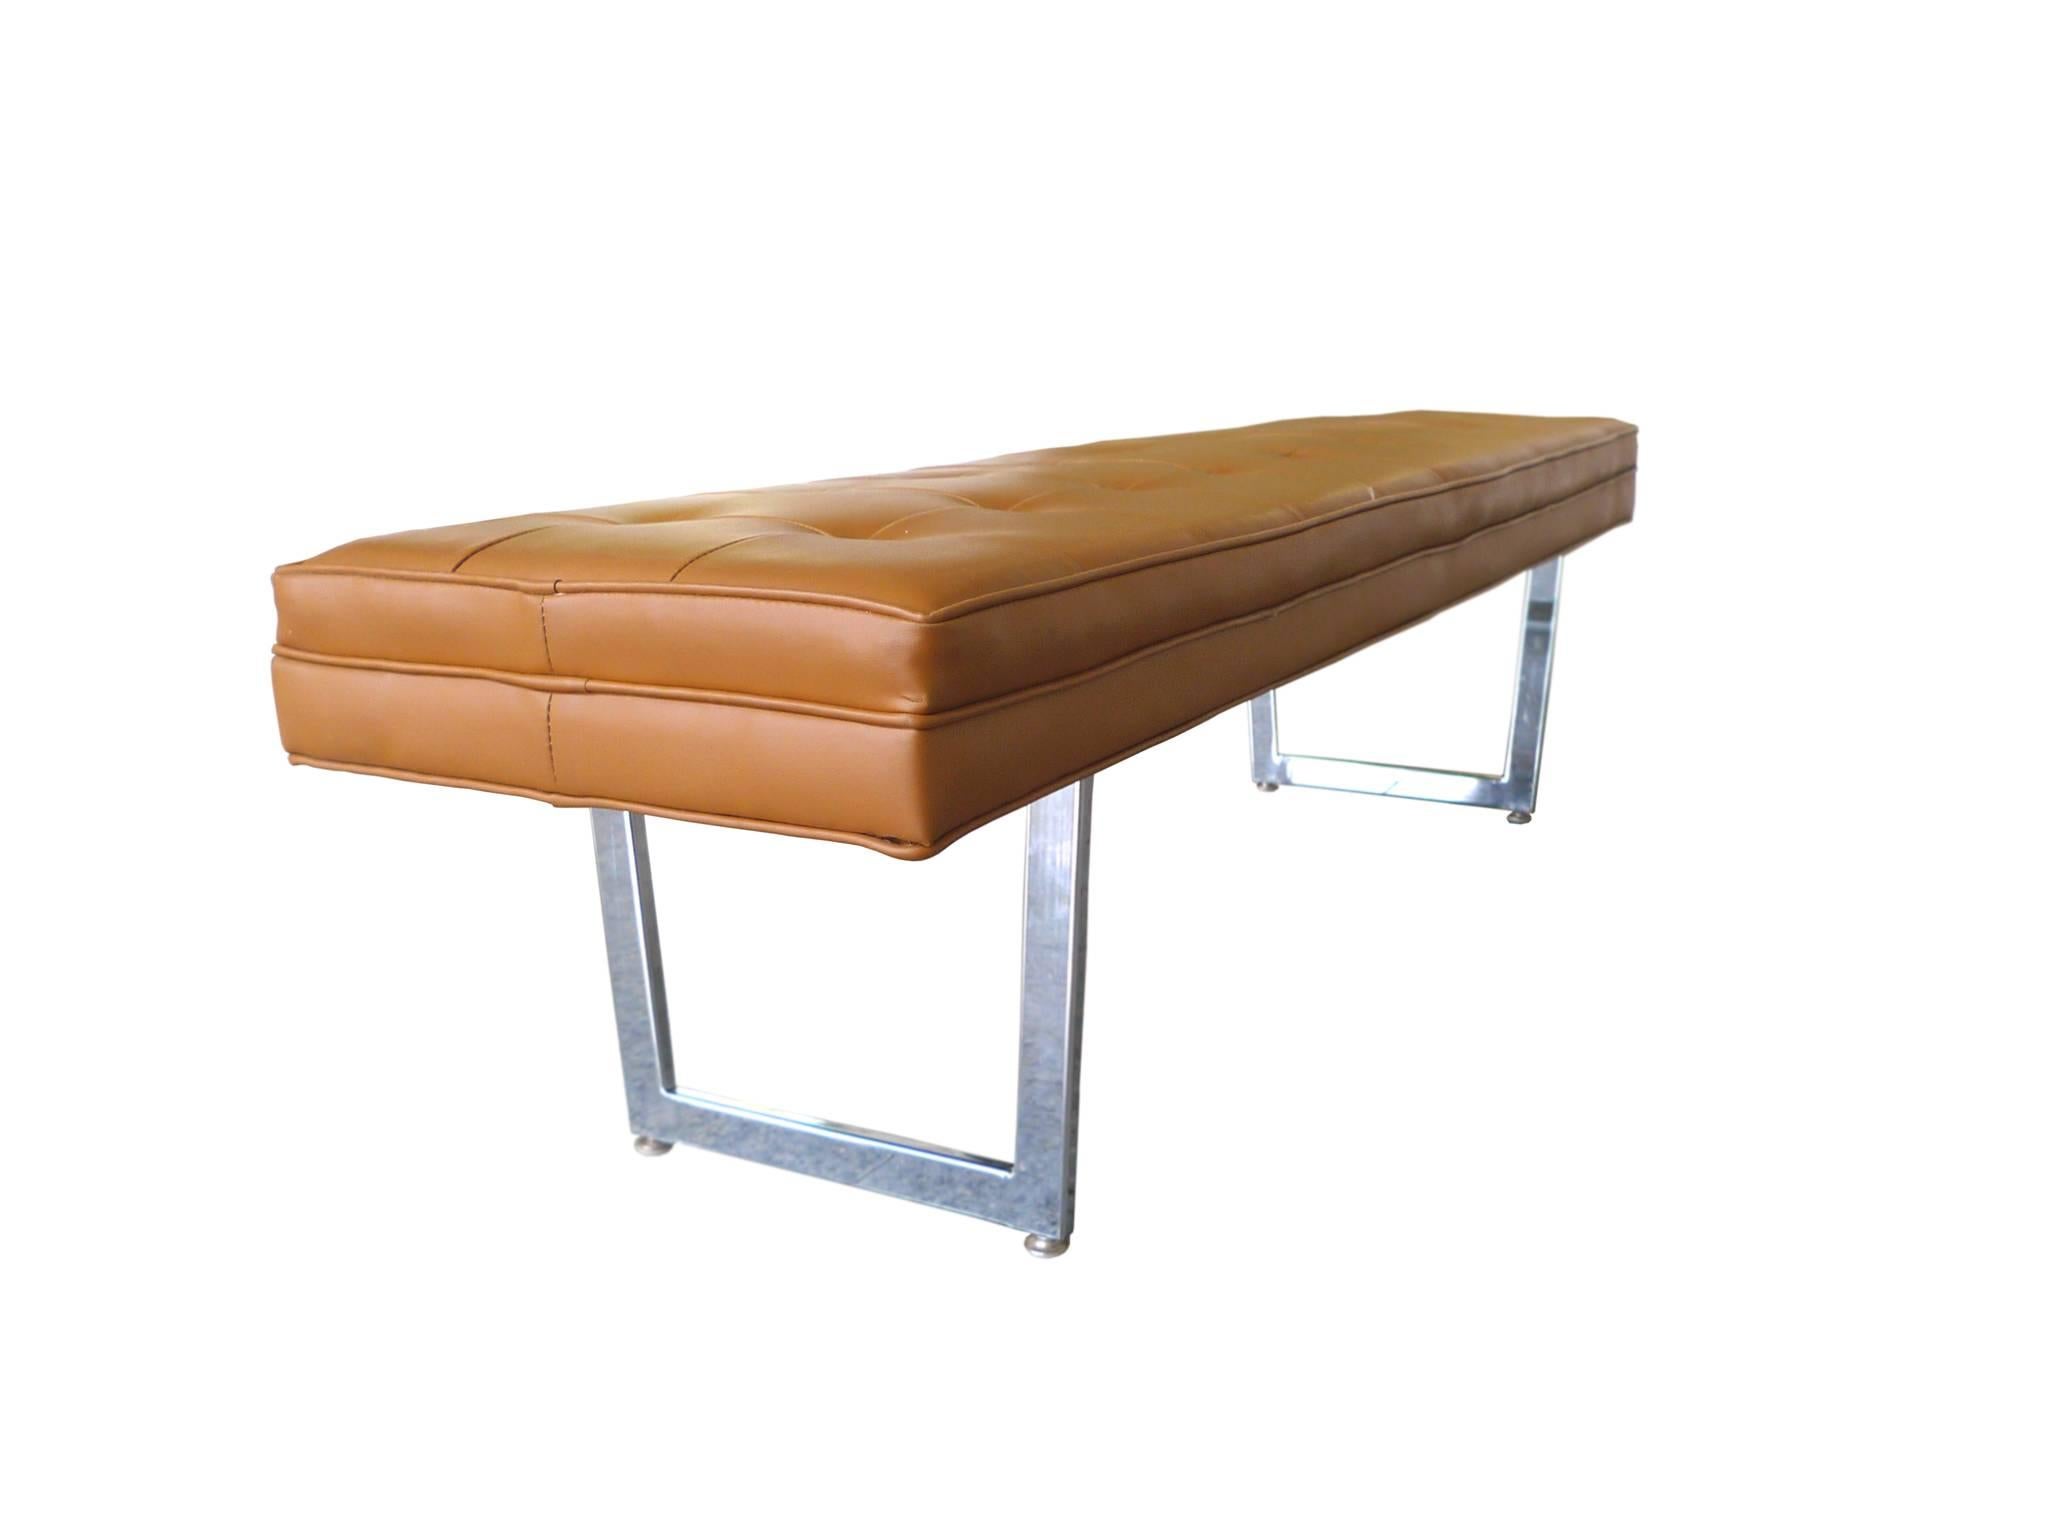 This minimally designs Knoll-style bench was manufactured by the Patrician Furniture Company in the 1970s. The upholstery is vinyl in a rich caramel hue with biscuit tufting and piping. The sled legs are chrome bars with peg supports.